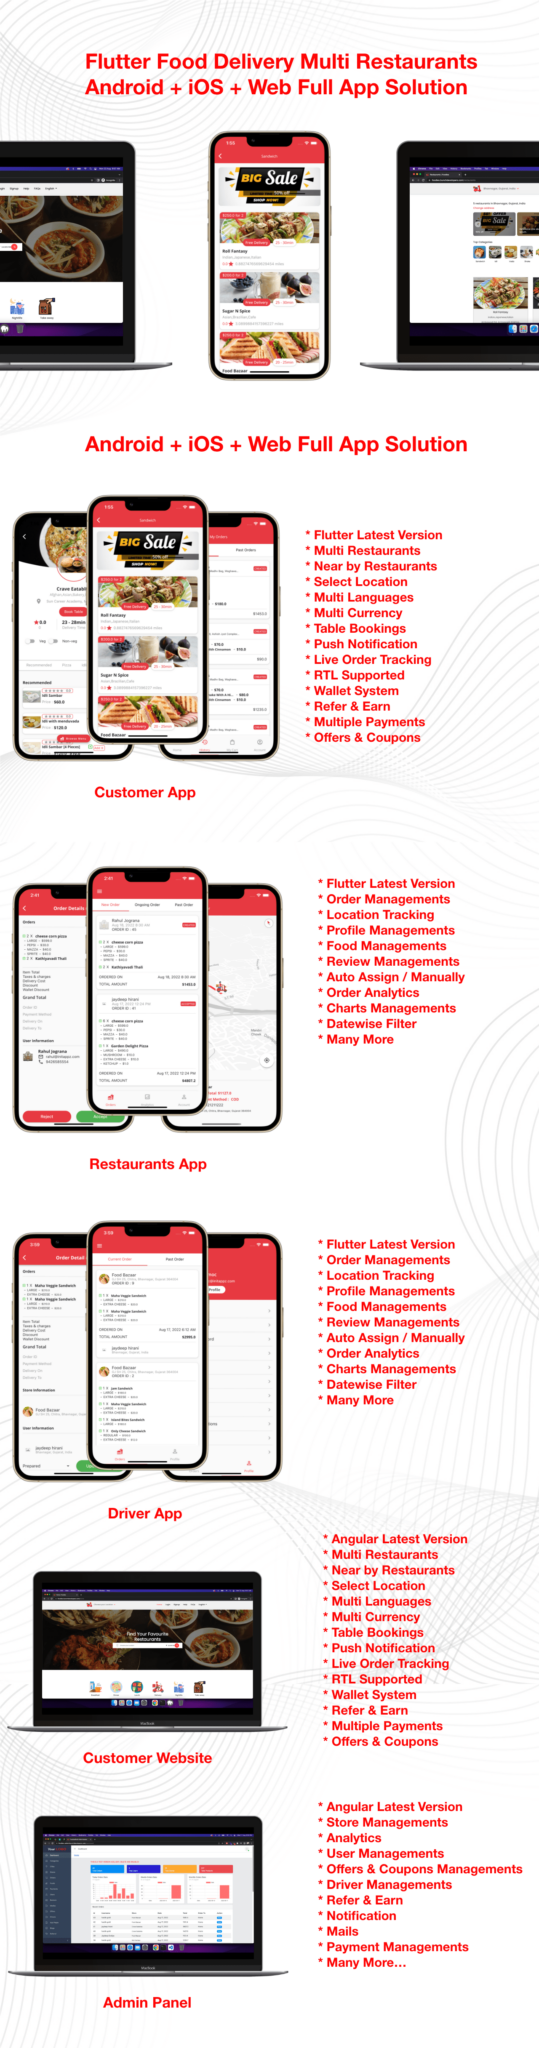 Flutter 3 Food Delivery Multi Restaurants Laravel Backend (Android + iOS + Website + Admin + PWA) - 2